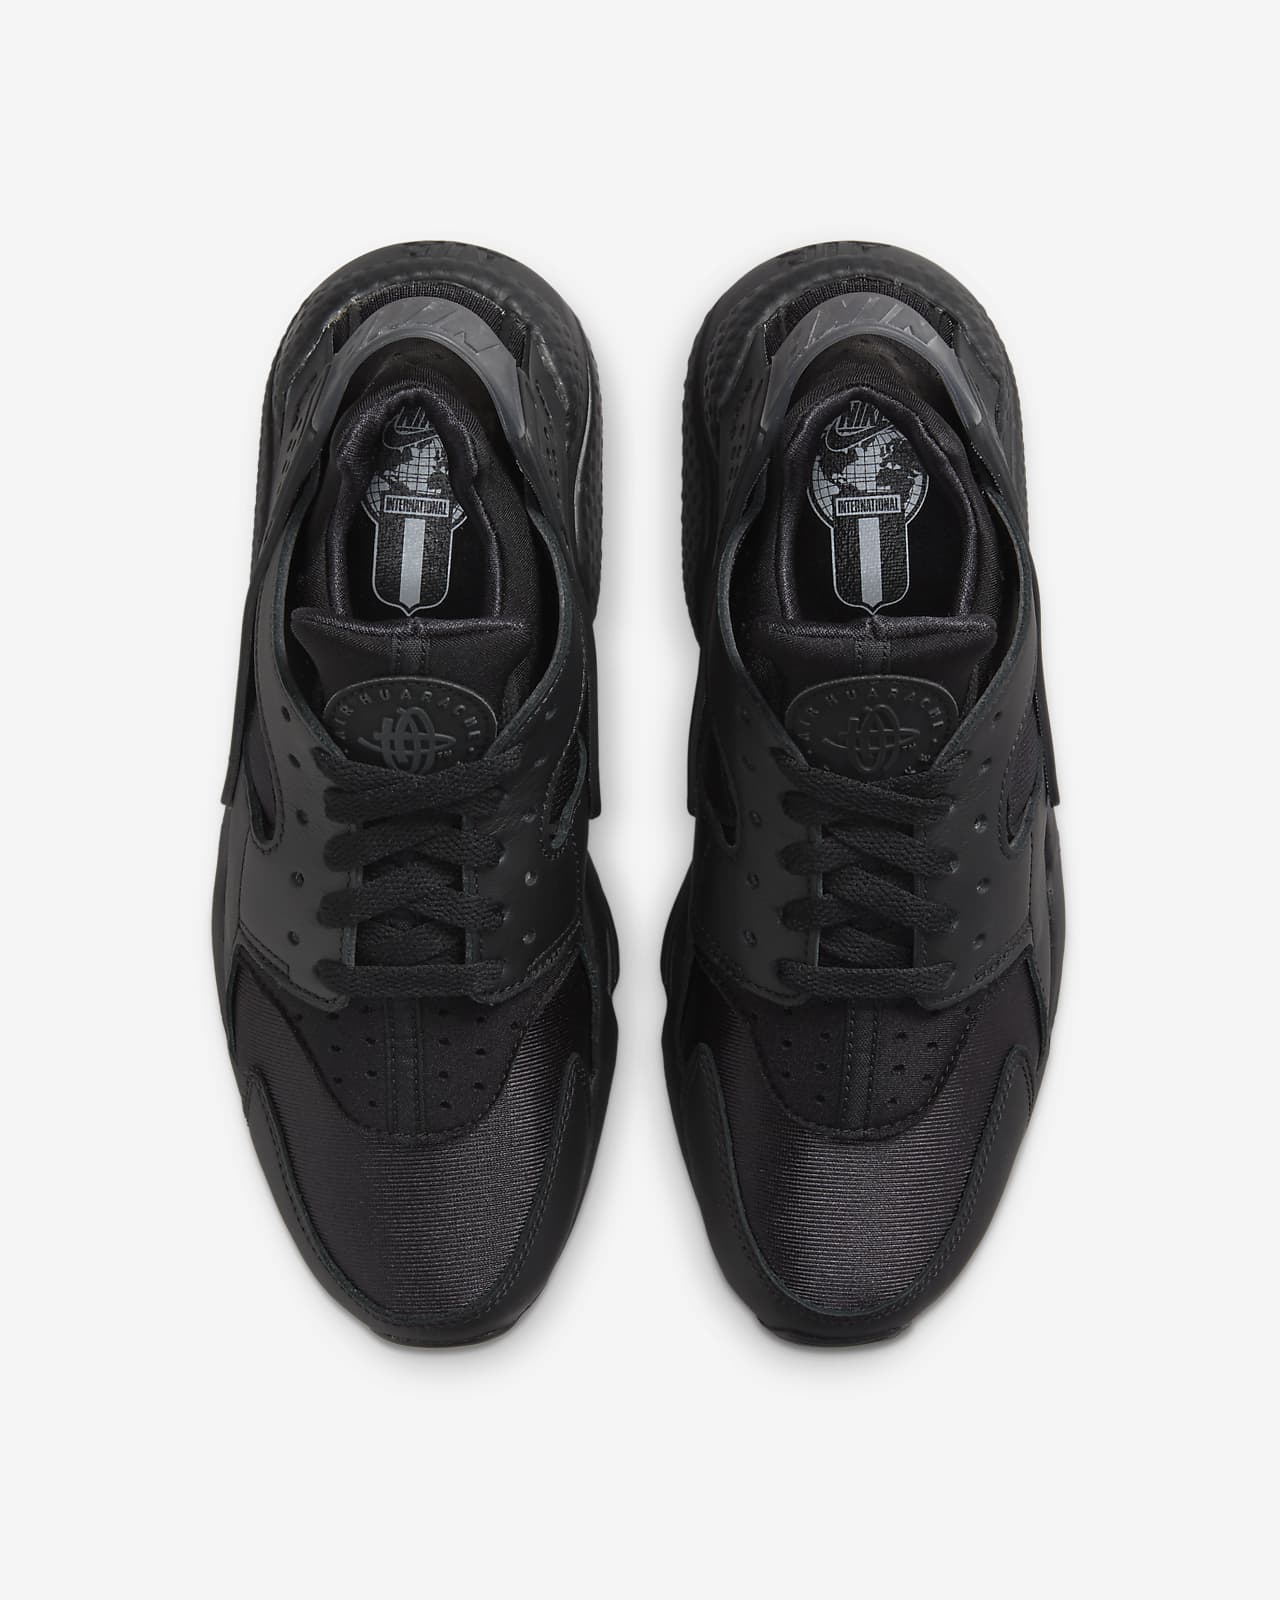 images of air huaraches